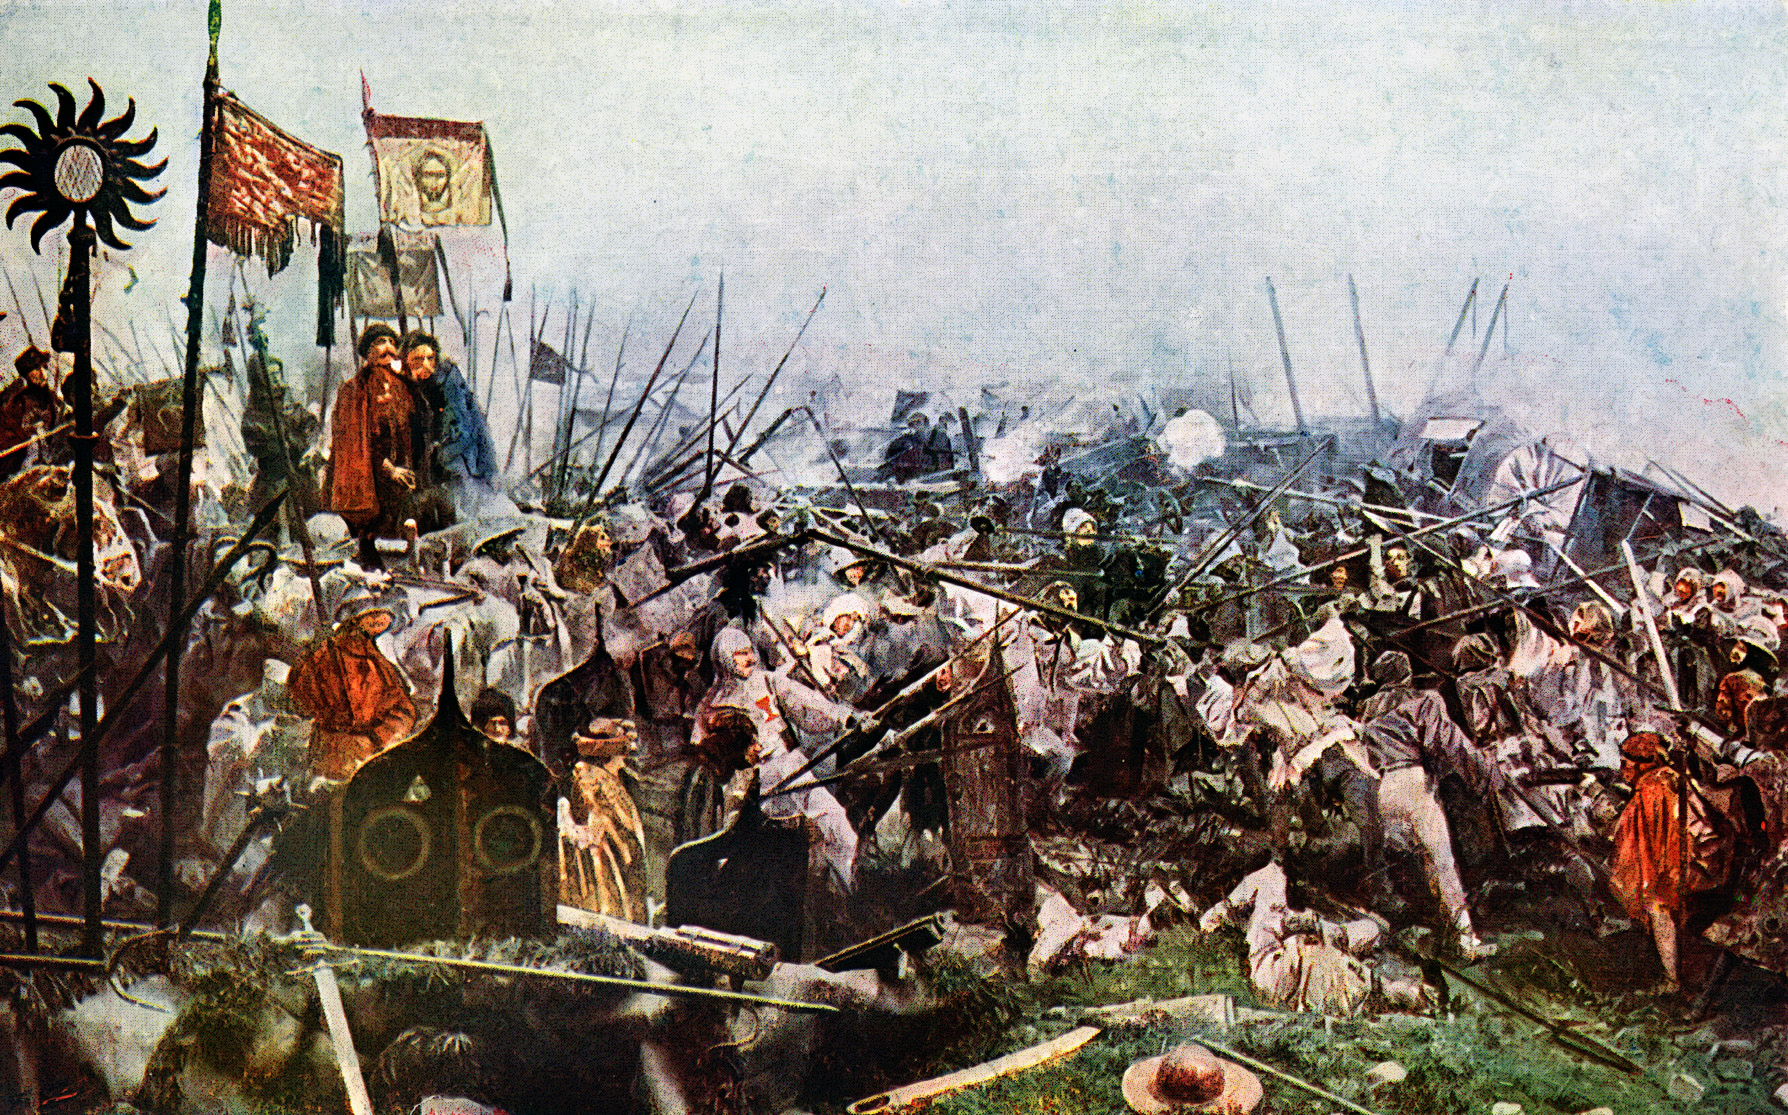 The Hussite Wars continued long after sexagenarian Ziska died in 1424. Unfortunately, Hussite factions waged bitter warfare with each other after vanquishing their crusader foes.